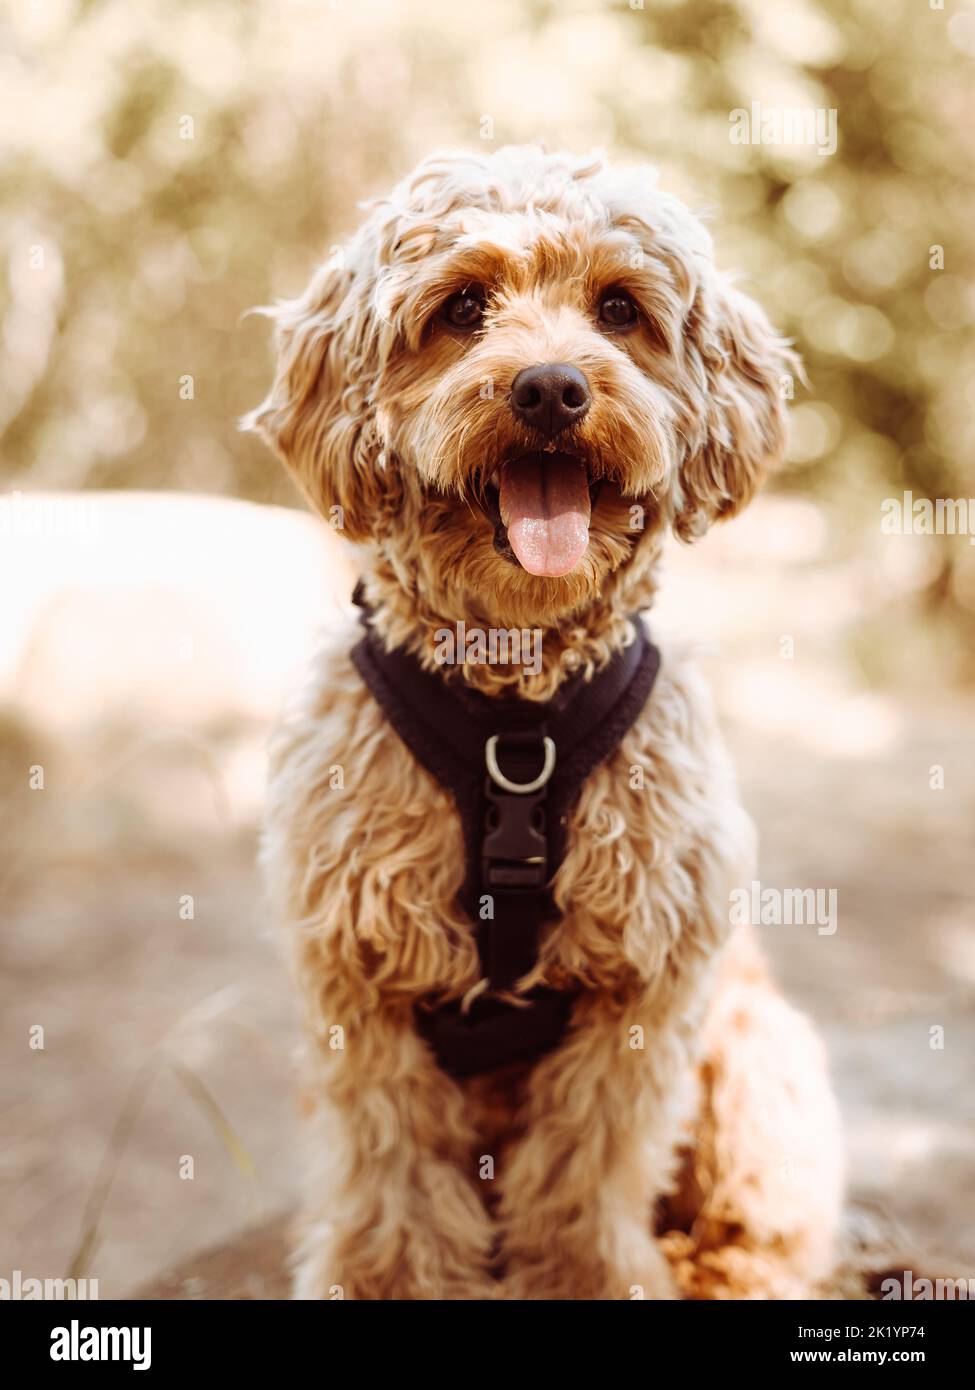 Cavapoo dog wearing black harness sitting steady with tongue out, looking straight forward at the camera. Female dog with curly fur sitting on the Stock Photo